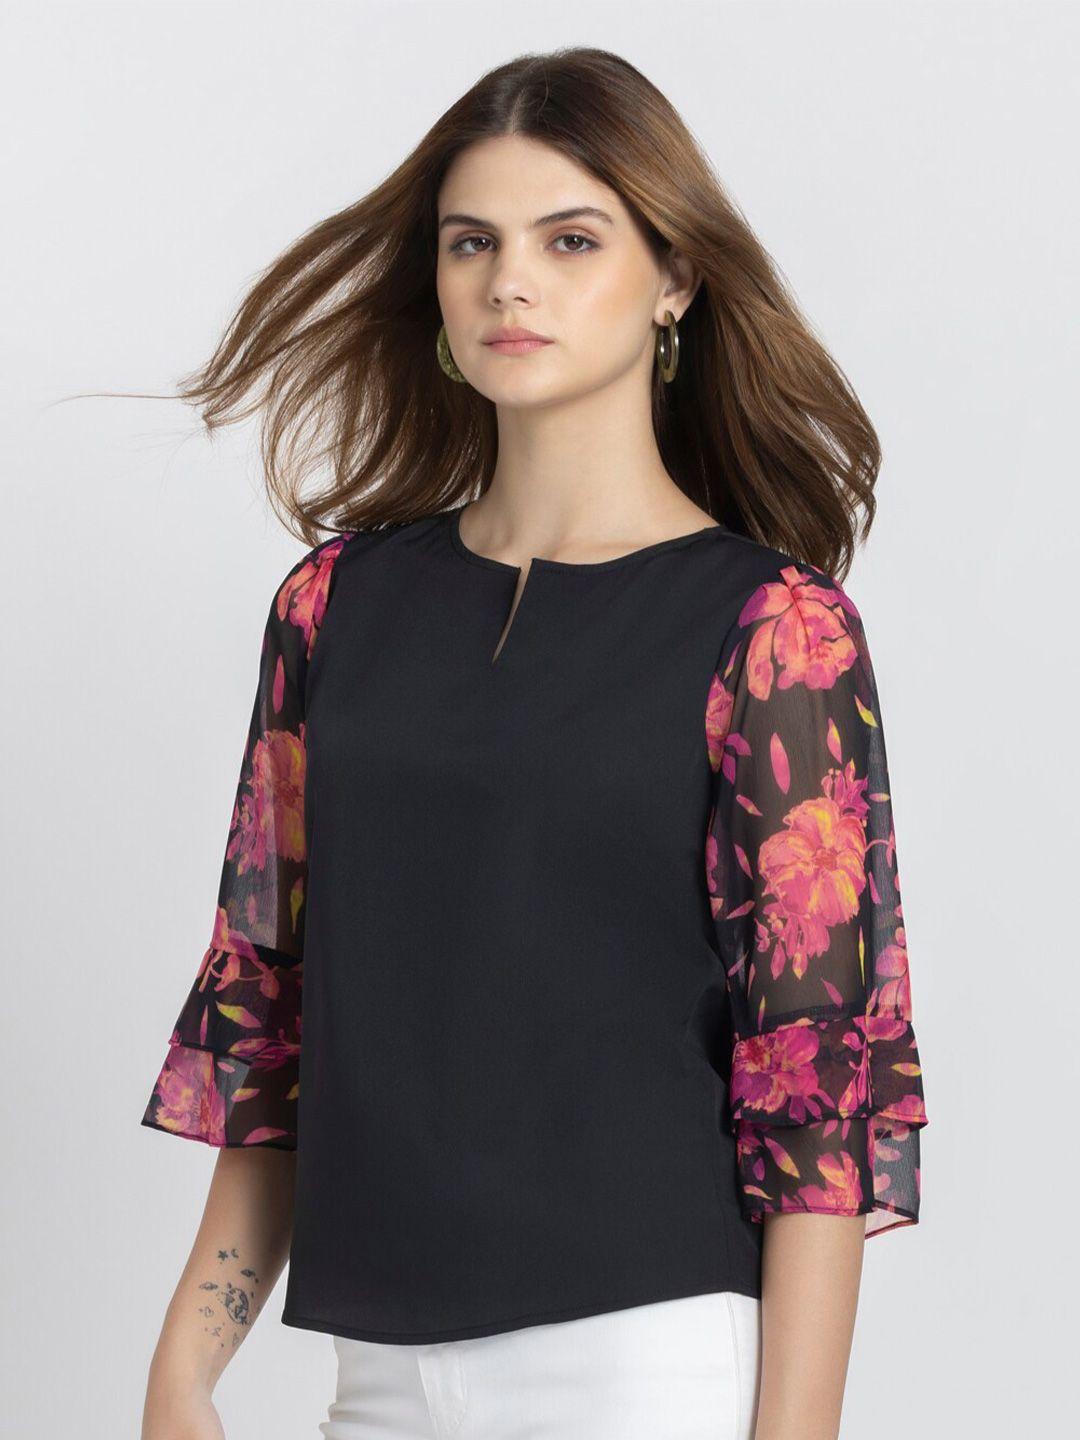 shaye floral flared sleeve casual top